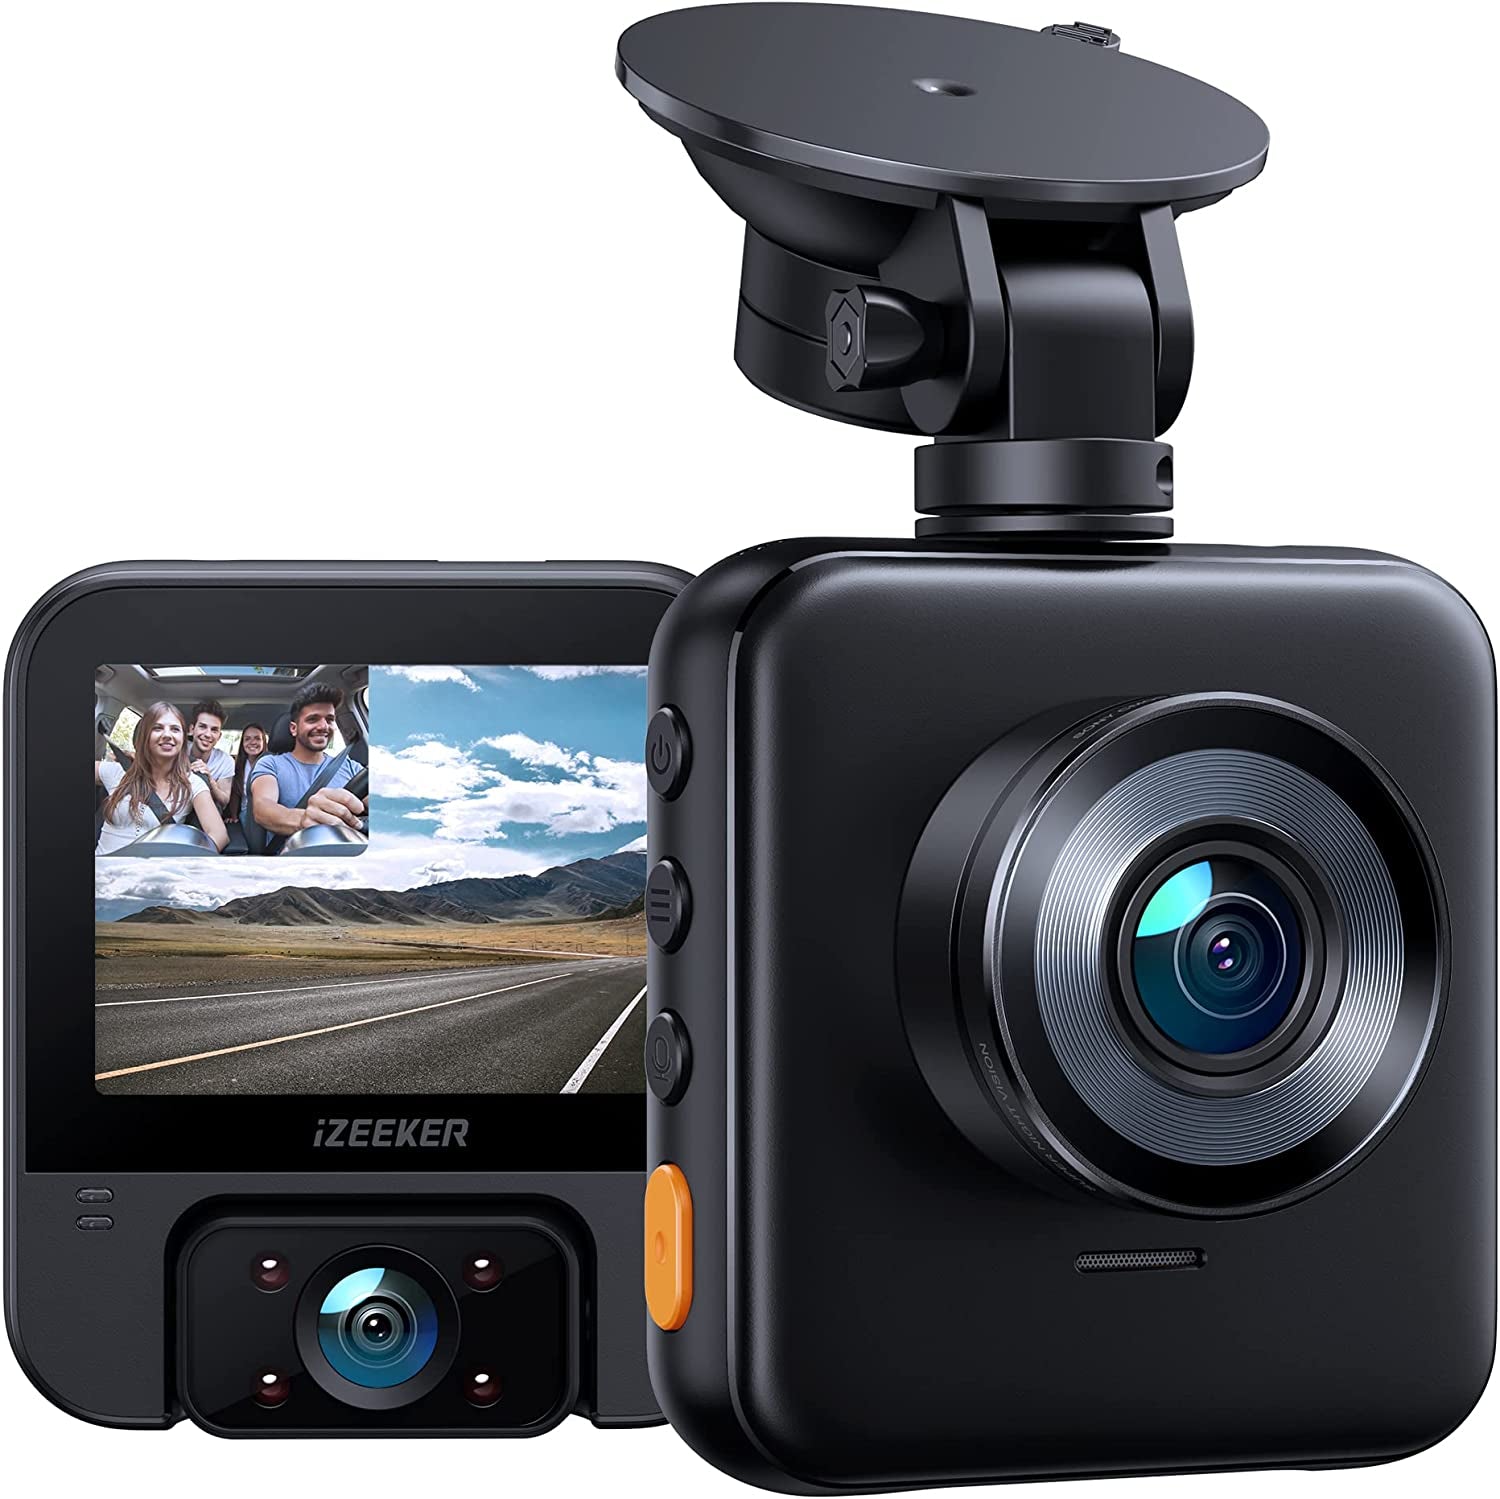 navycrest Dash Cam WiFi 2K 1440P Car Dashcam Recorder, Dashcams for Cars  with SD Card Included, Night Vision, 170 degrees Wide Angle, WDR, Loop